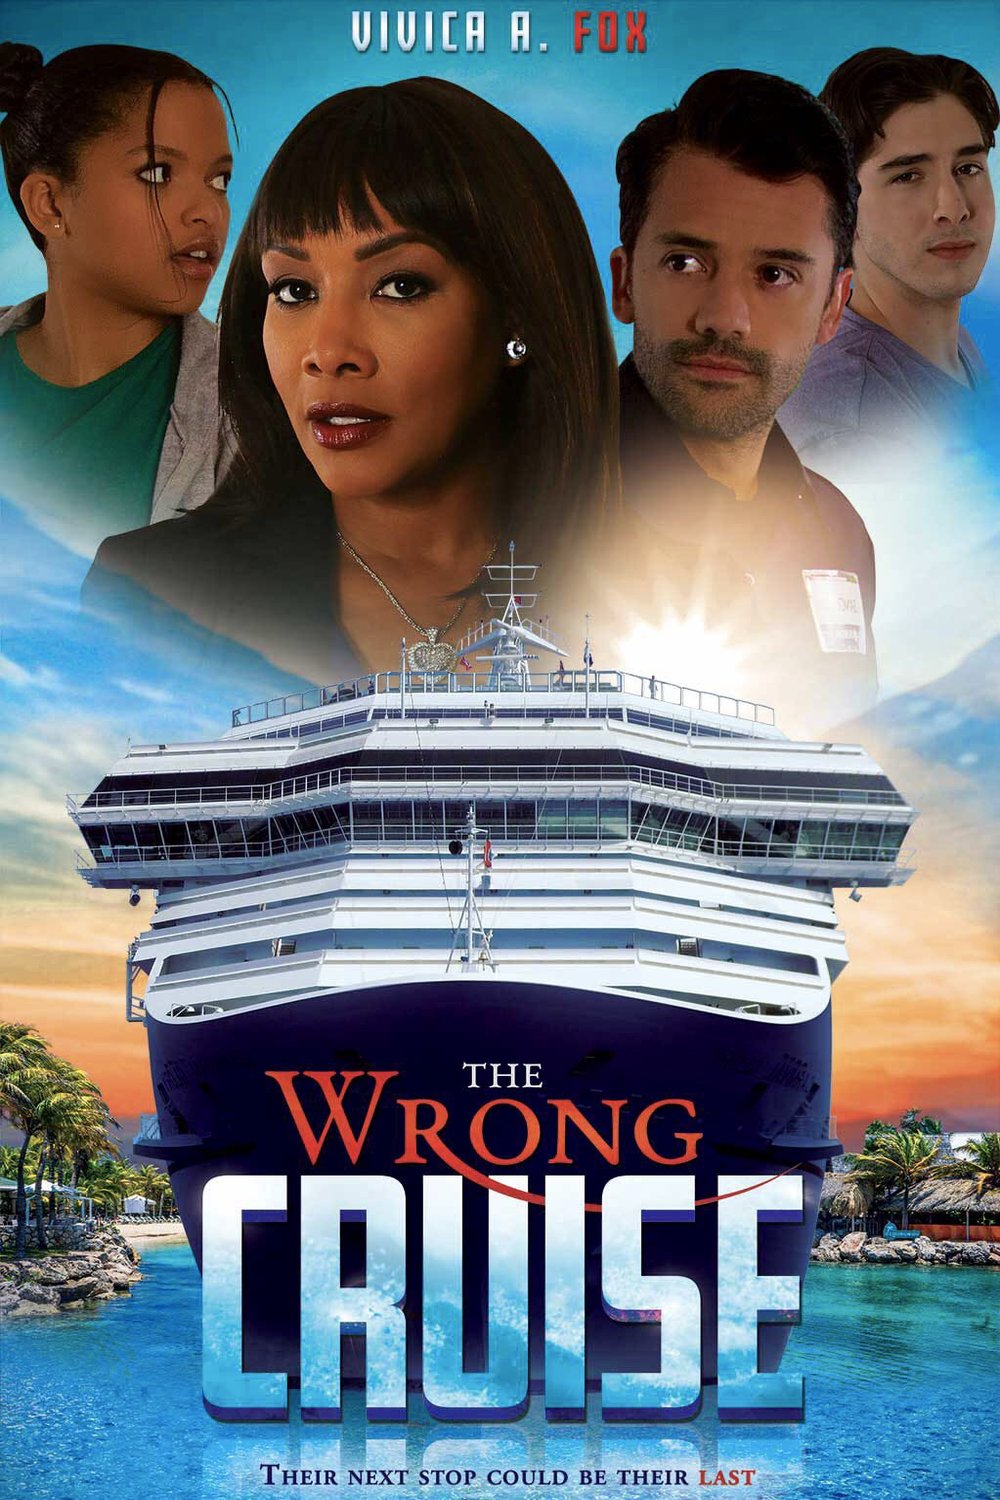 L'affiche du film The Wrong Cruise